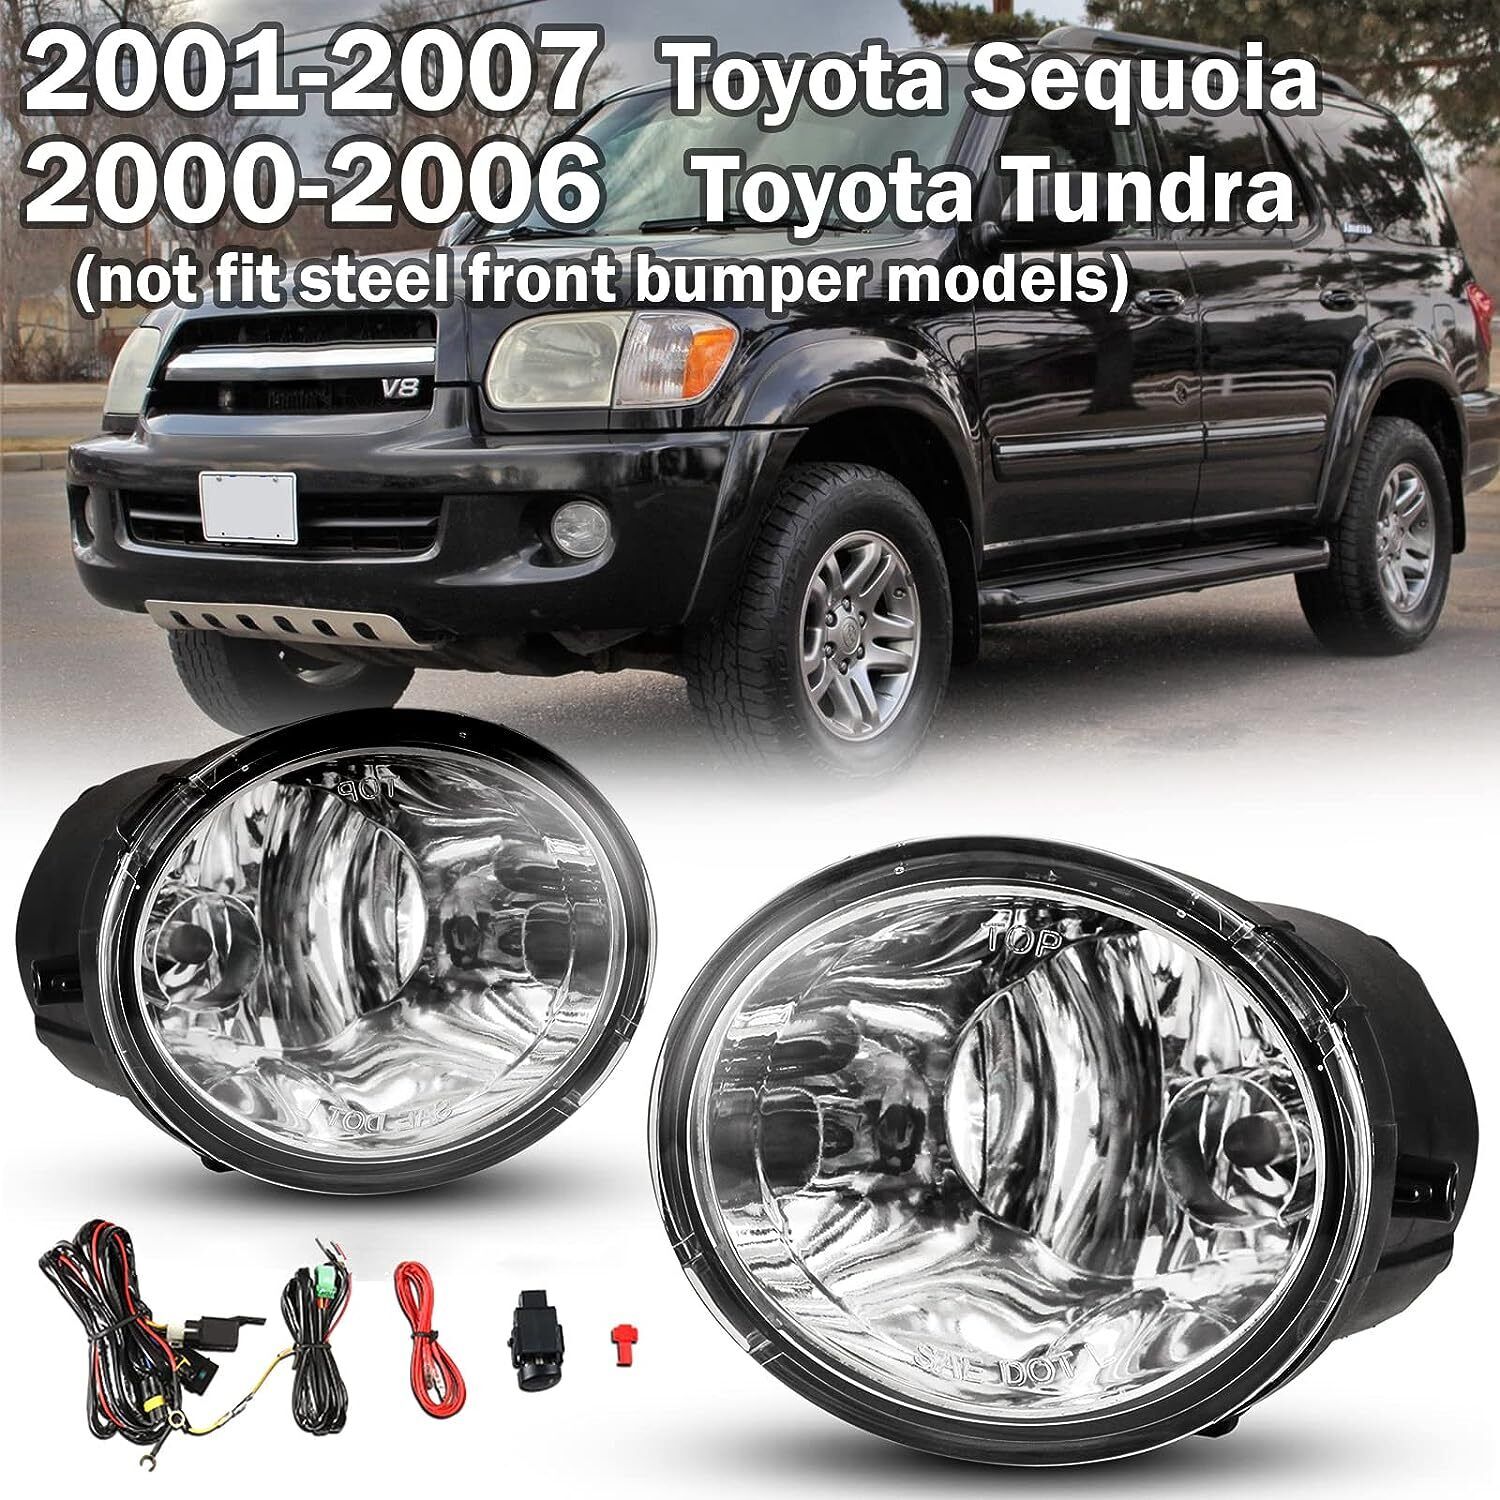 Pair Fog Lights For 2000-2006 Toyota Tundra / 2001-2007 Toyota Sequoia Fog Lamps